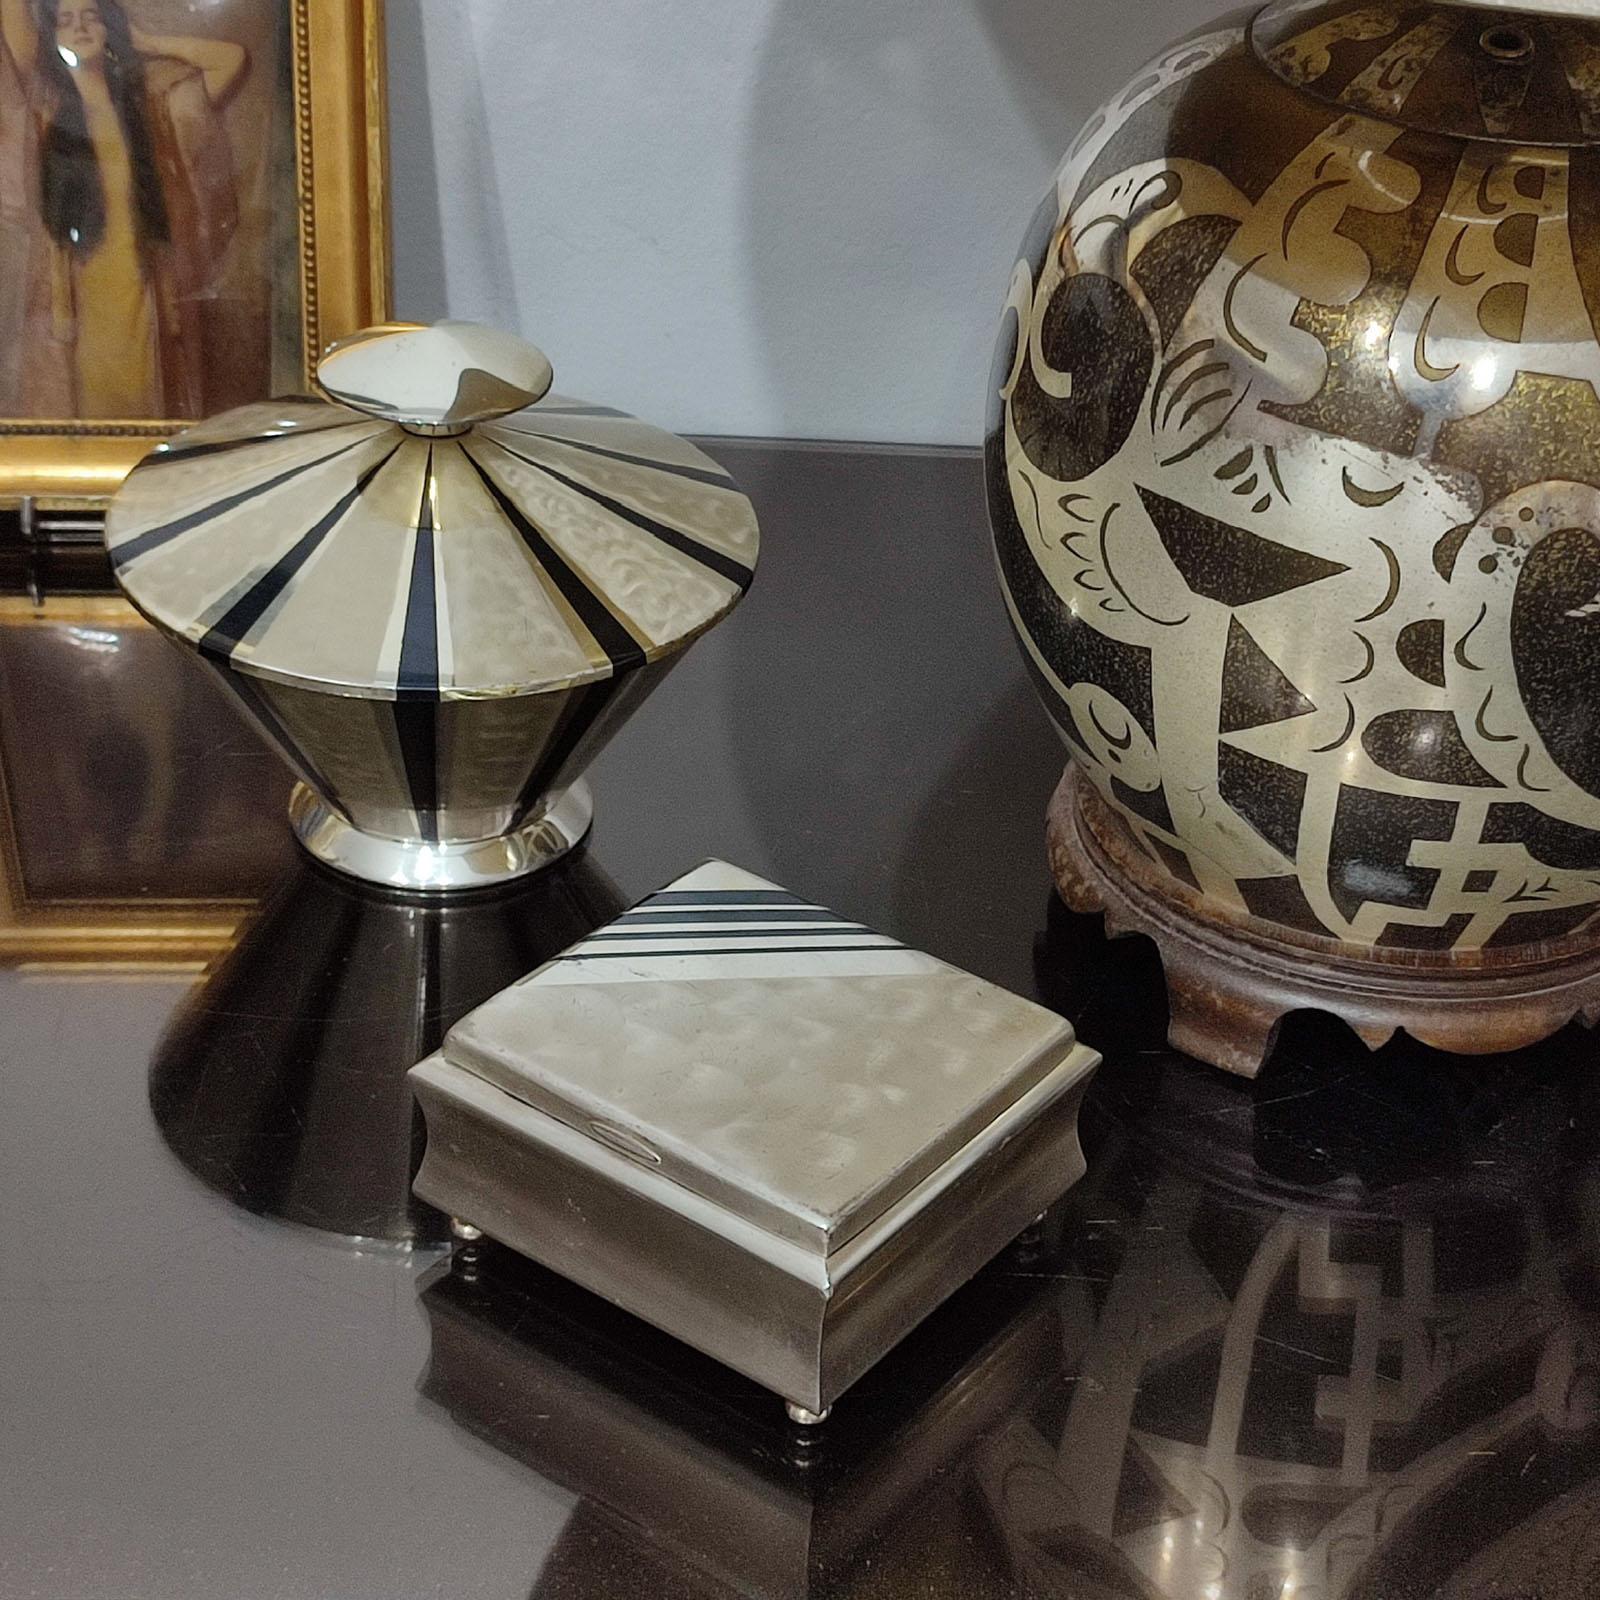 Sophisticated lidded box by WMF for Ikora Metall Collection. Silver-plated Art Deco geometric shape, with a lovely black enamel radial banded motif adorning the top and the body. A perfect piece to store keys or small objects and a lovely addition